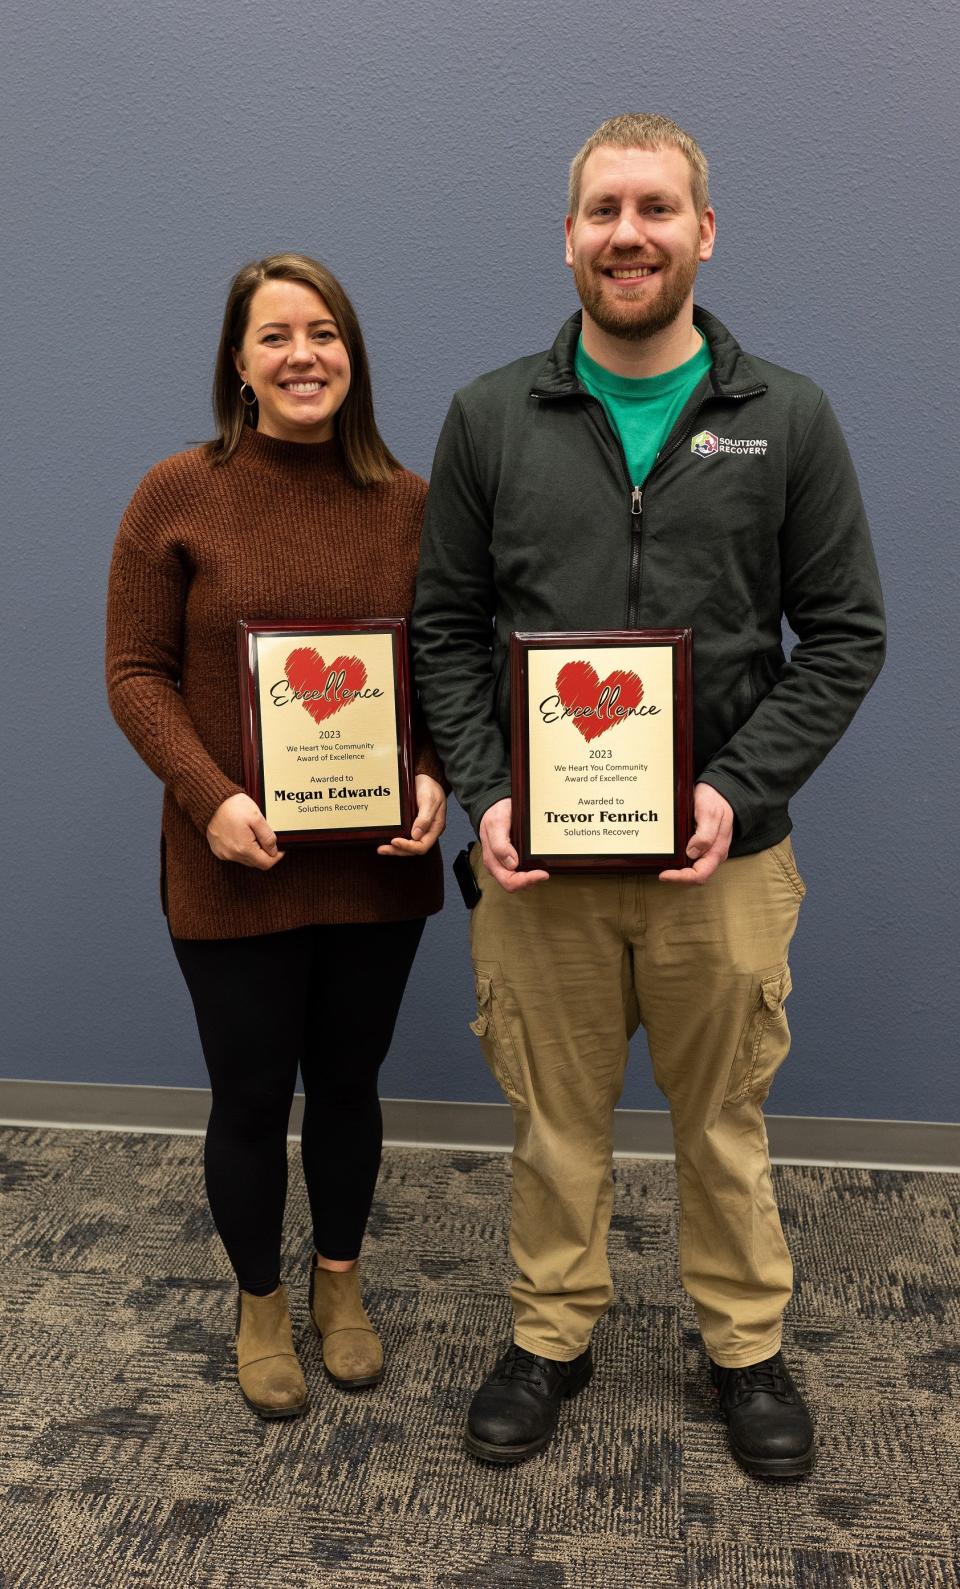 Program director Megan Edwards and executive director Trevor Fenrich of Solutions Recovery show off their We Heart You Celebration of Excellence awards.